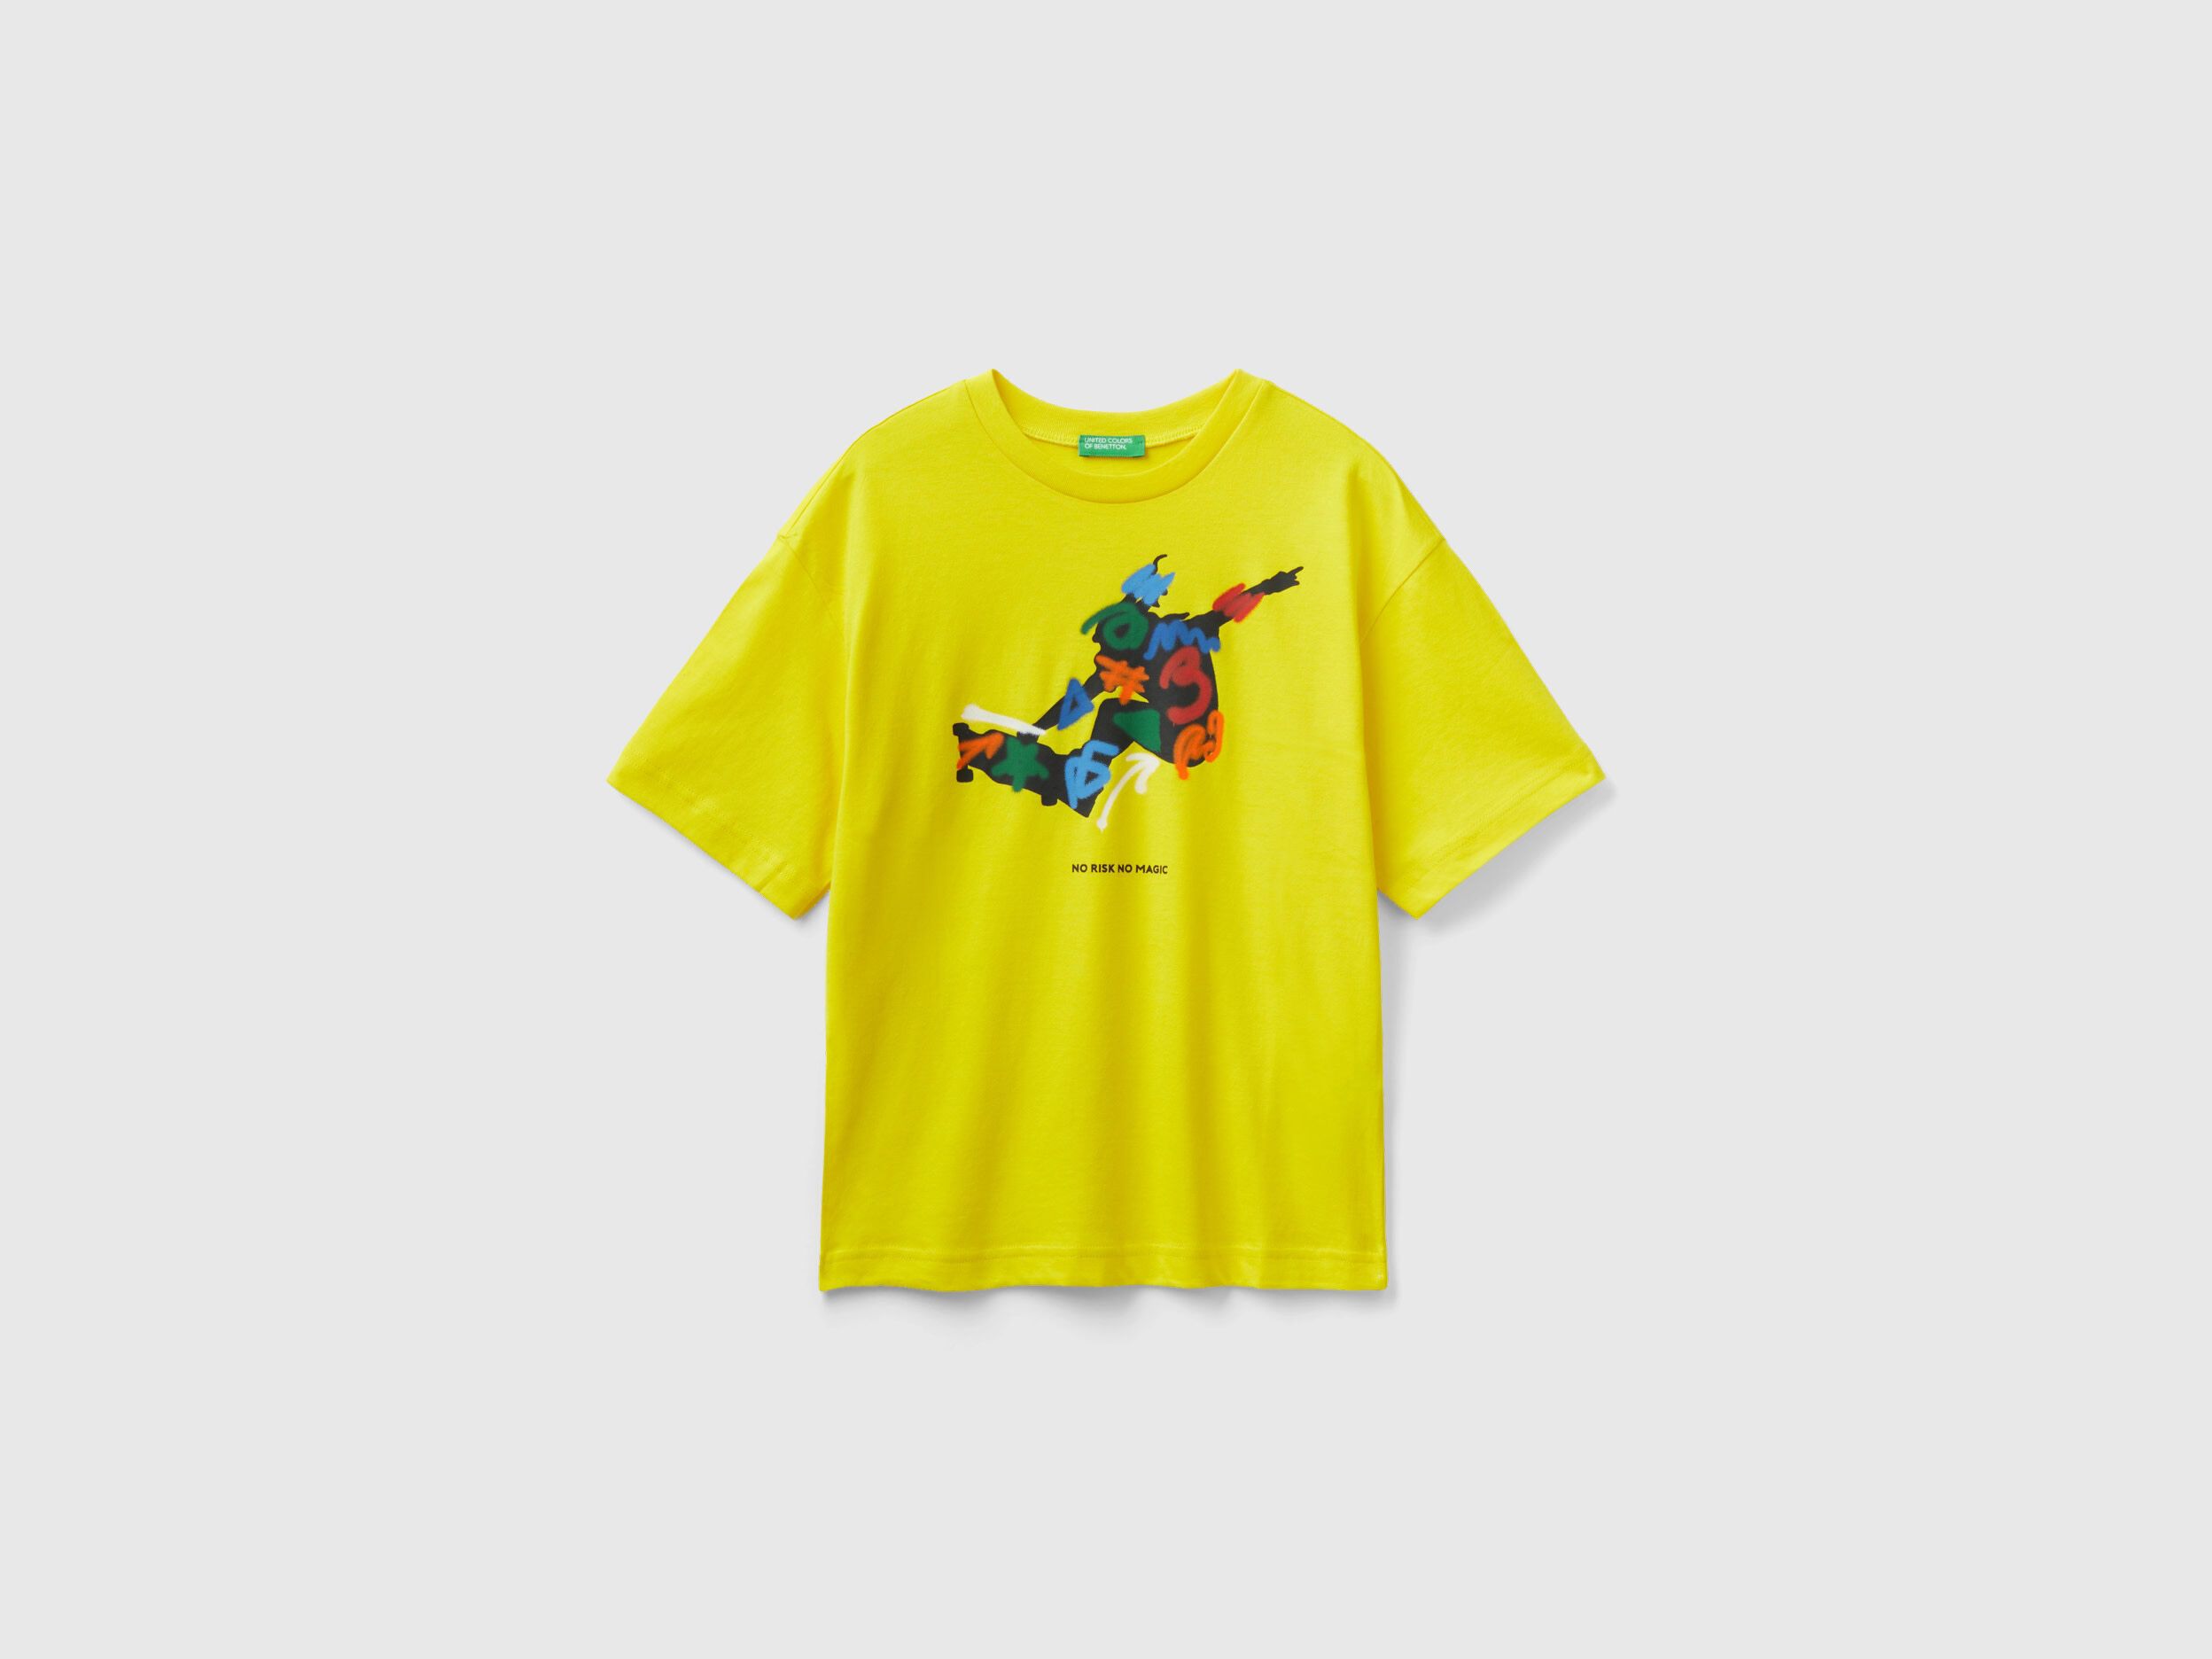 United Benetton, Crew Neck T-shirt With Print, size 3XL, Yellow, Kids